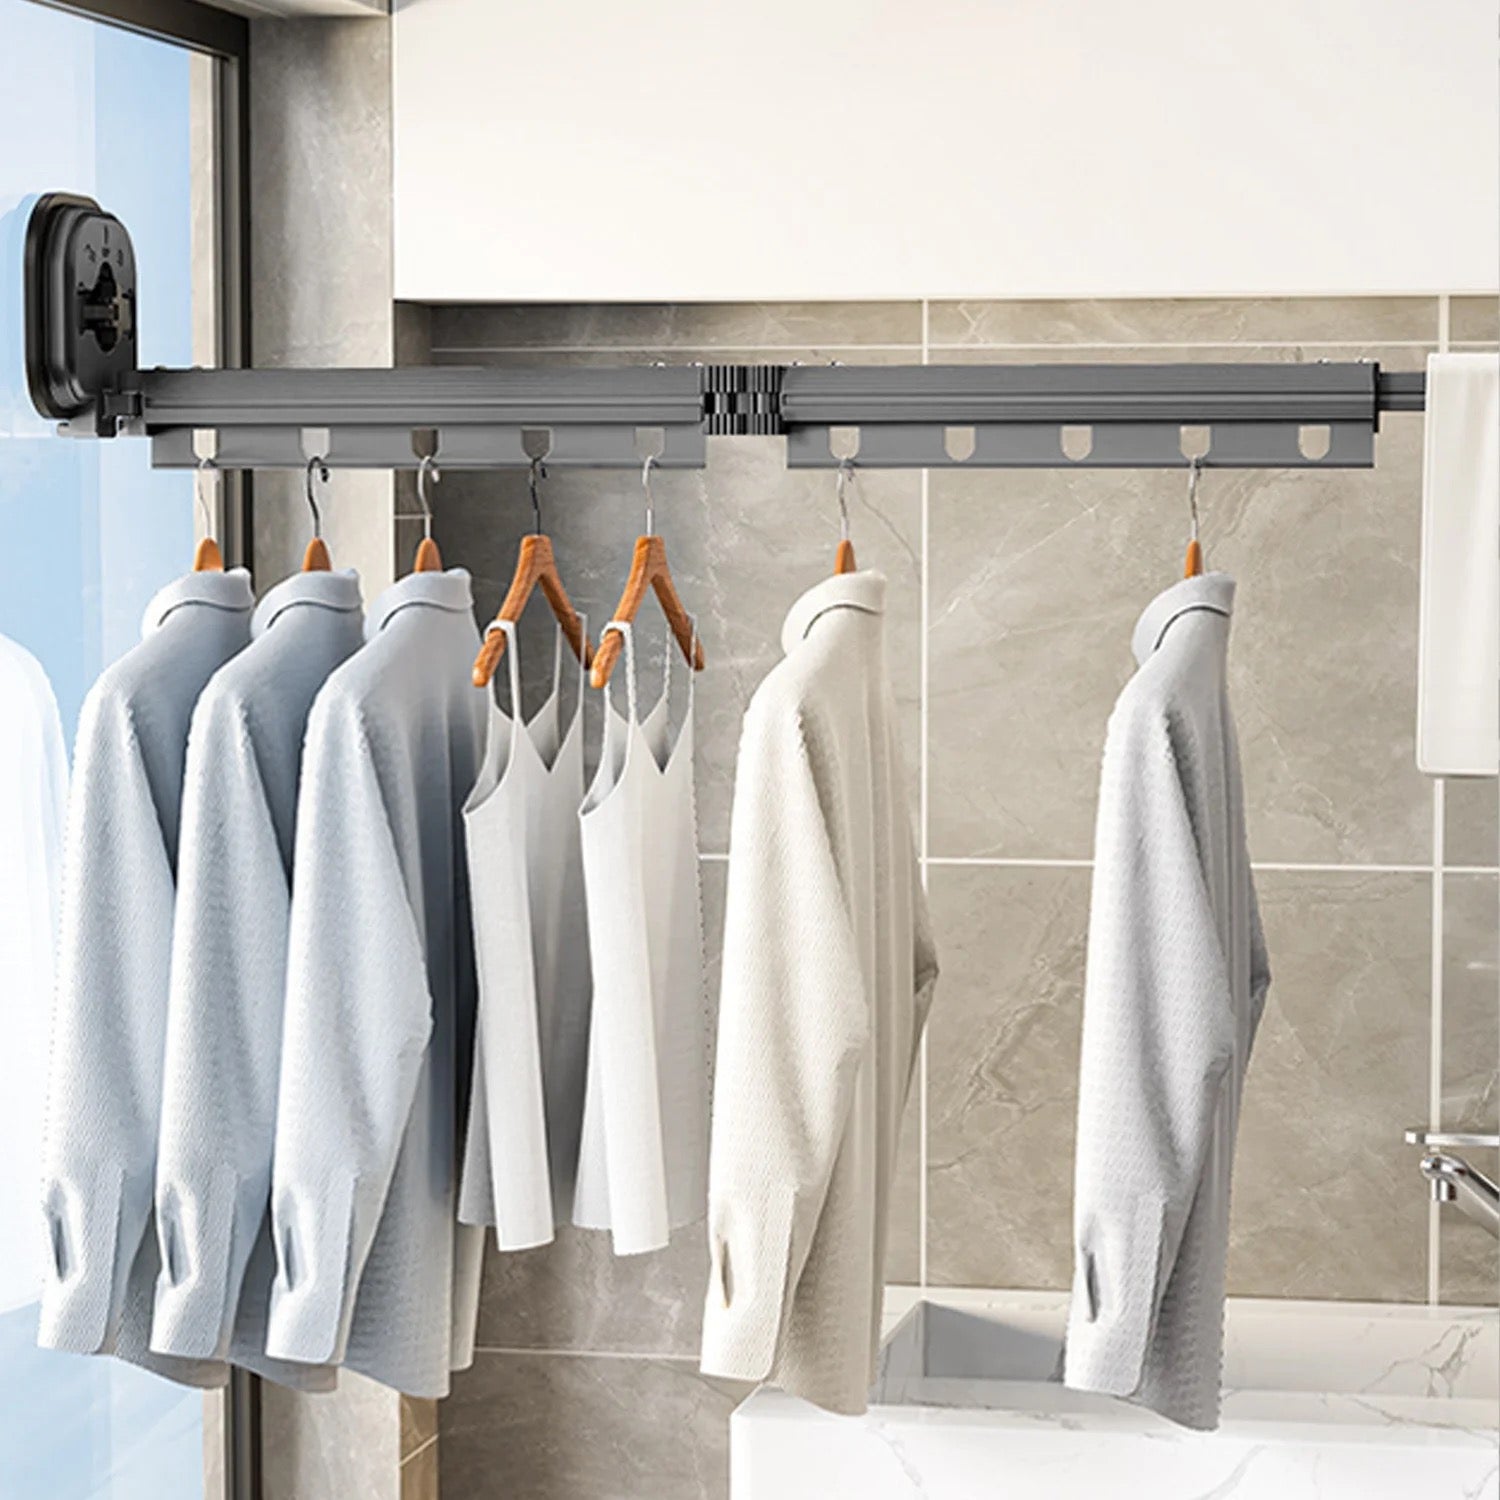 Clothes Drying Rack mounted on a glass and left unfolded with cloths hung 